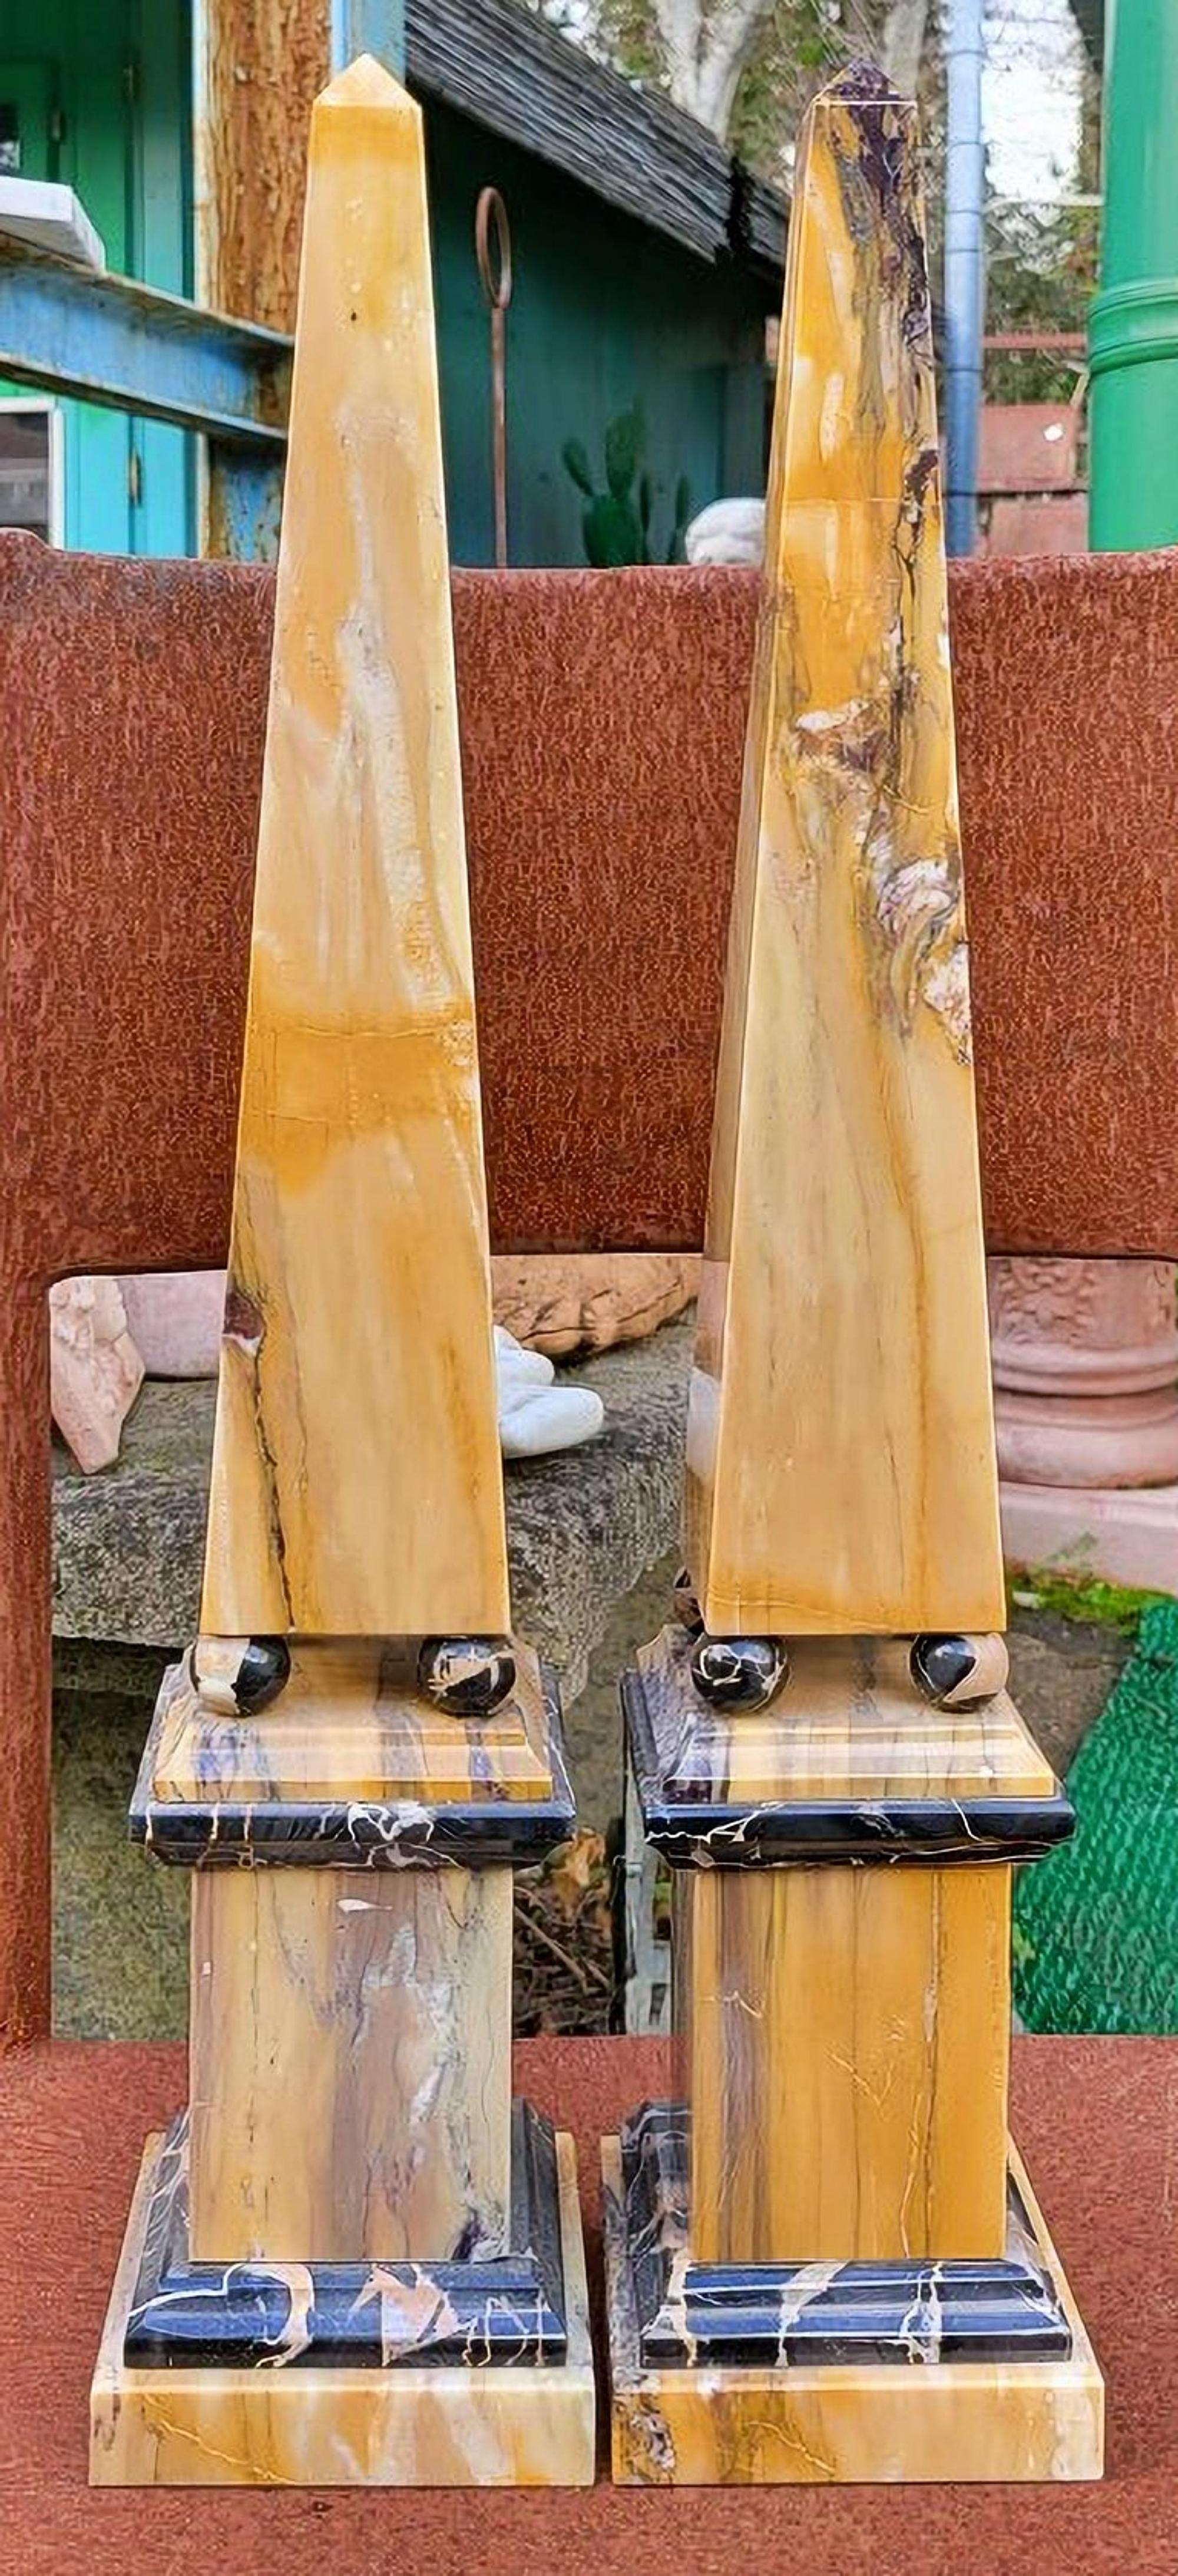 Pair of Siena and Portoro marble yellow obelisks
Beginning 20th century
Measure: height 56 cm
Weight 5 + 5 kg
Square base - side x side 10.5 x 10.5 cm
Manufacture Tuscany Pietrasanta (Lucca)
Material yellow Siena and Portoro marble.